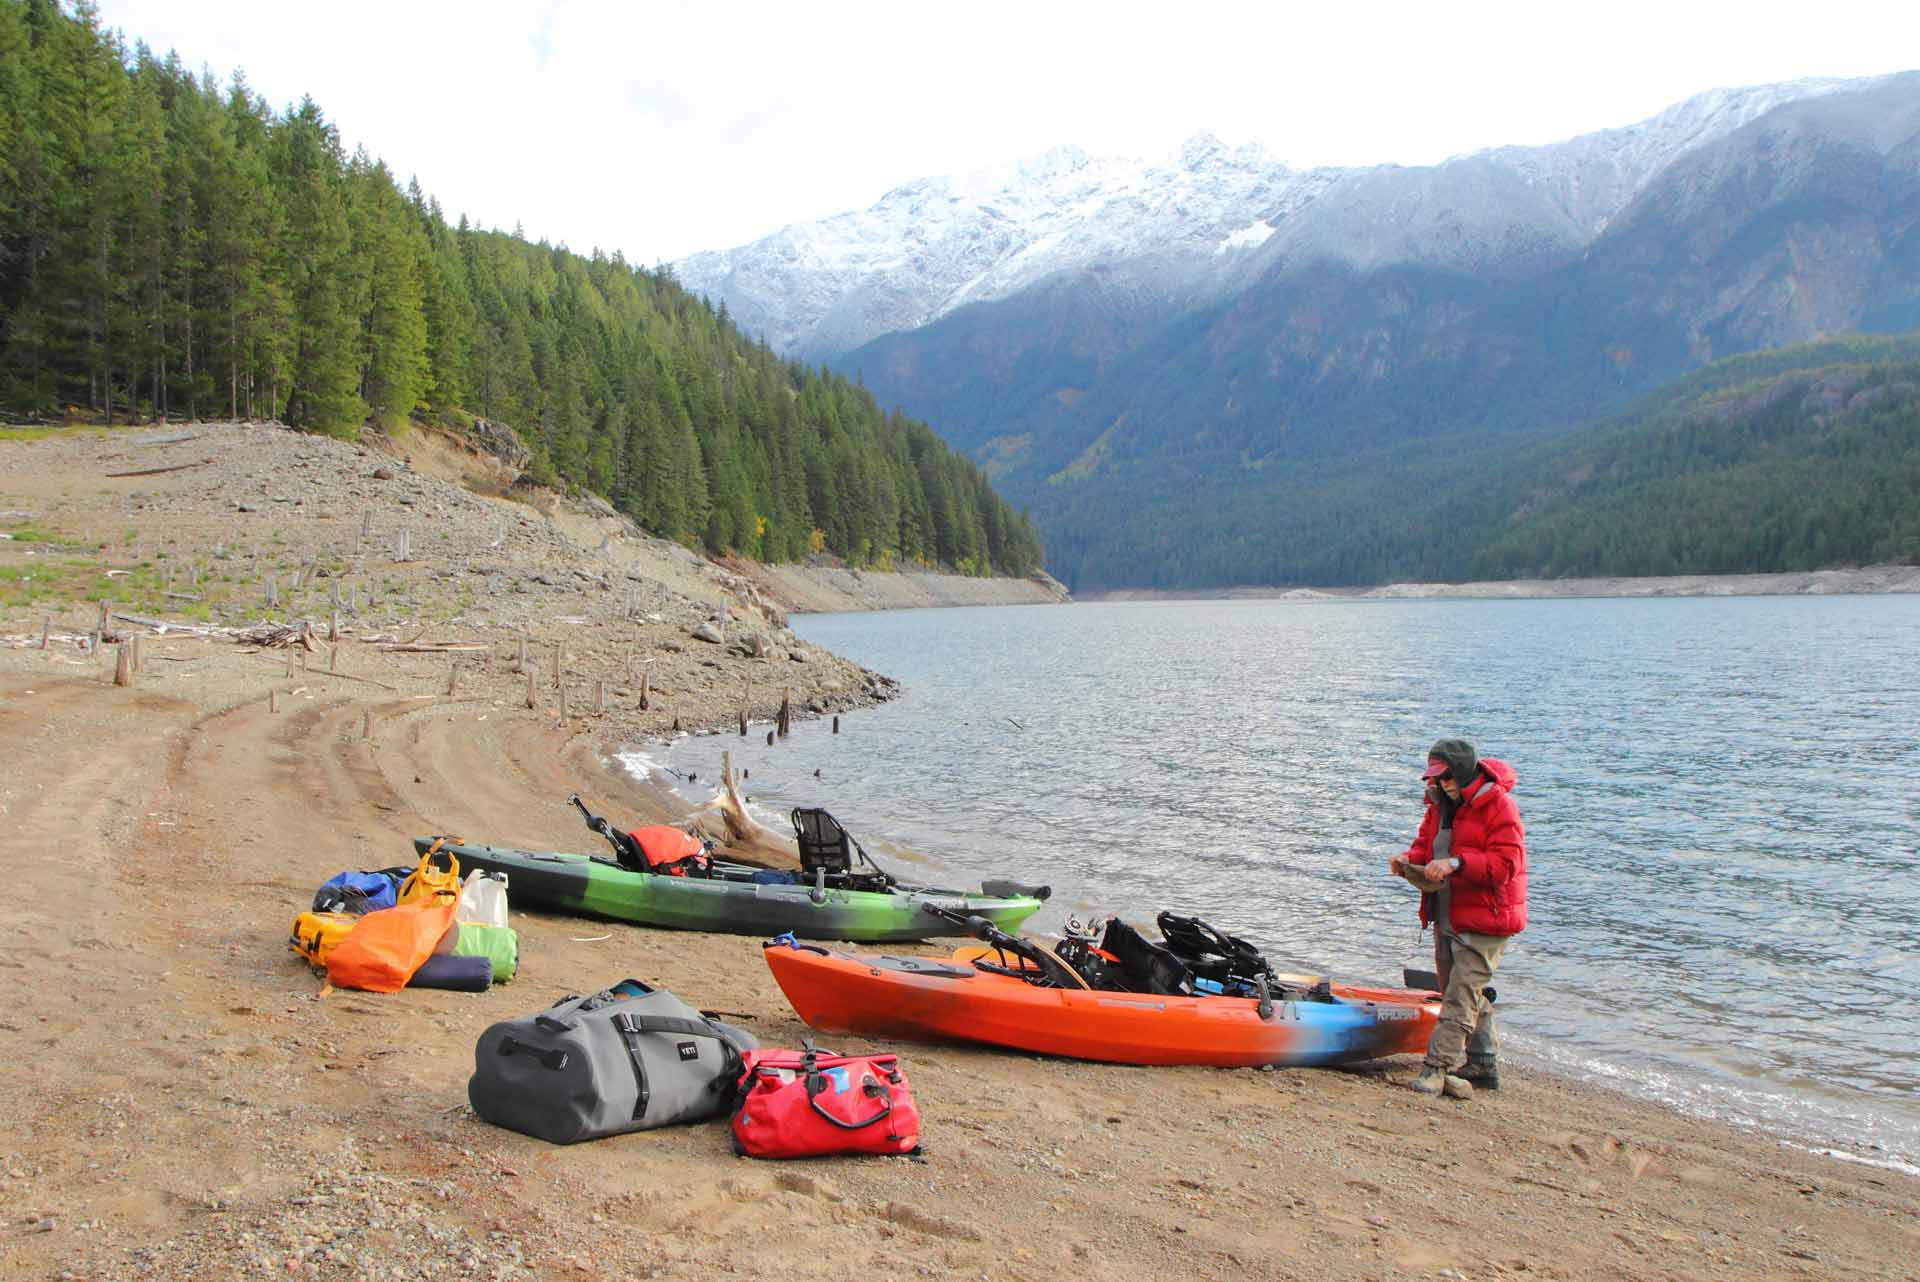 Expert advice for fly fishing the rugged Ross Lake in Washington